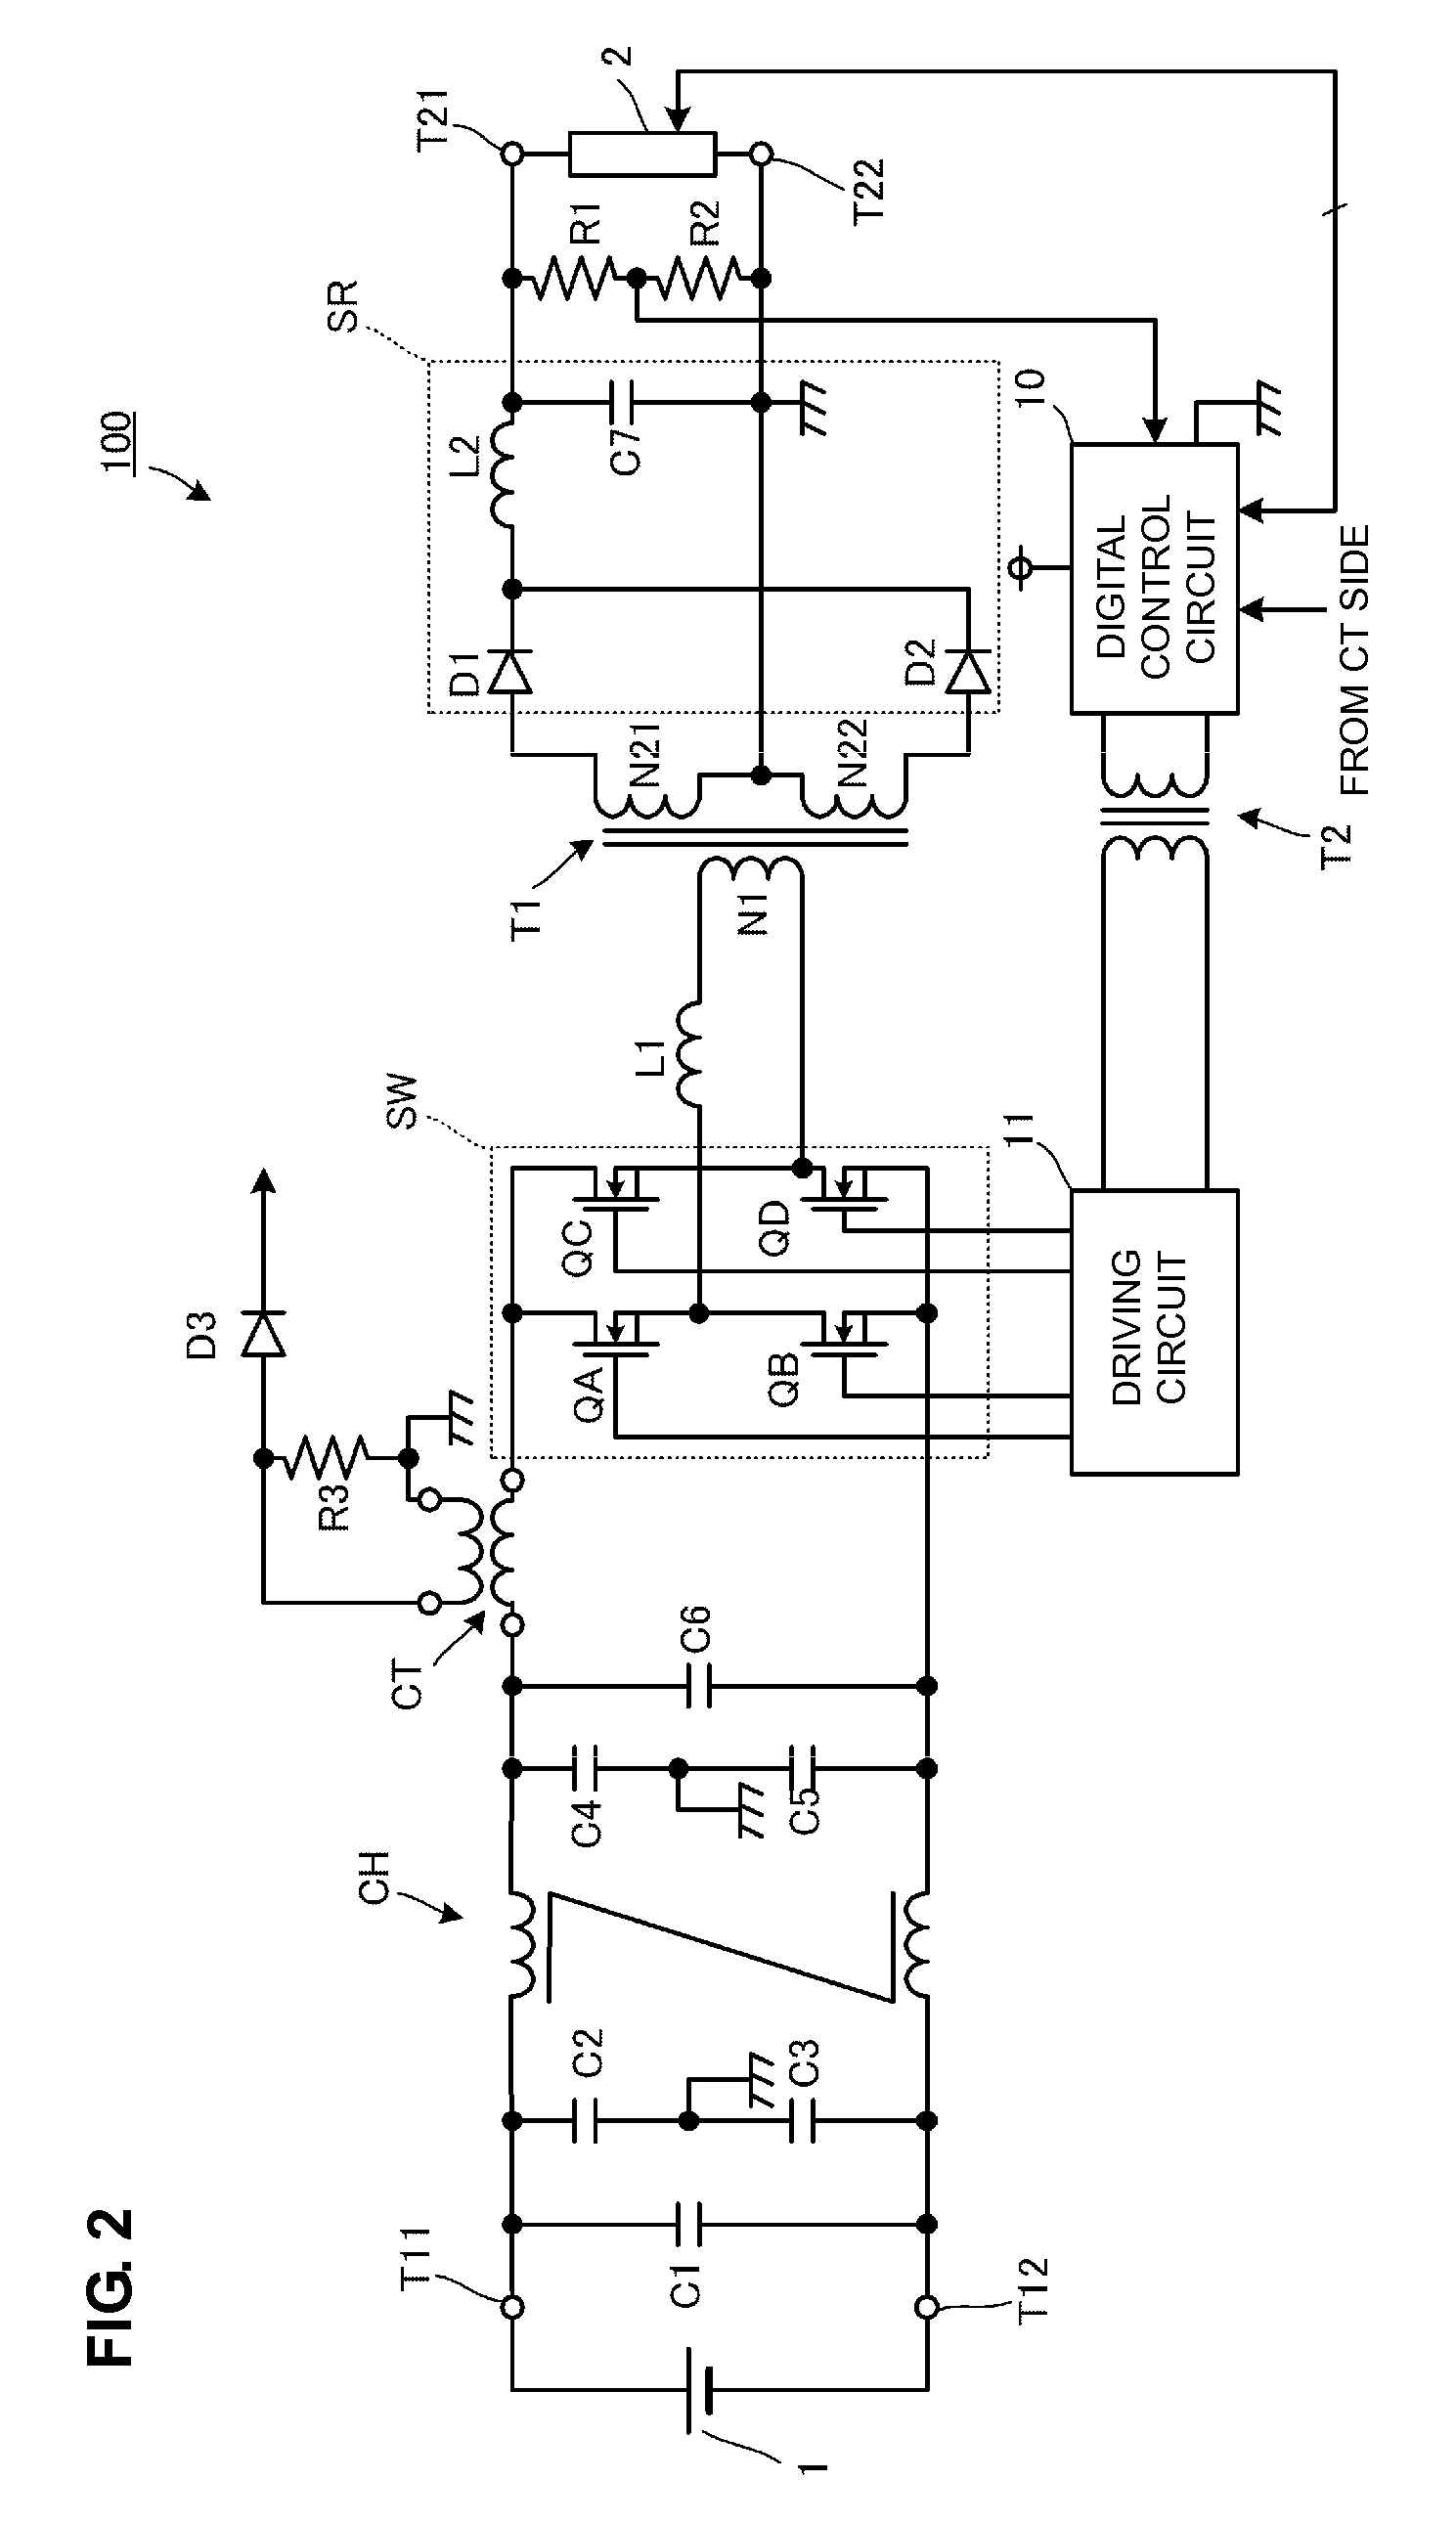 Isolated DC-DC converter